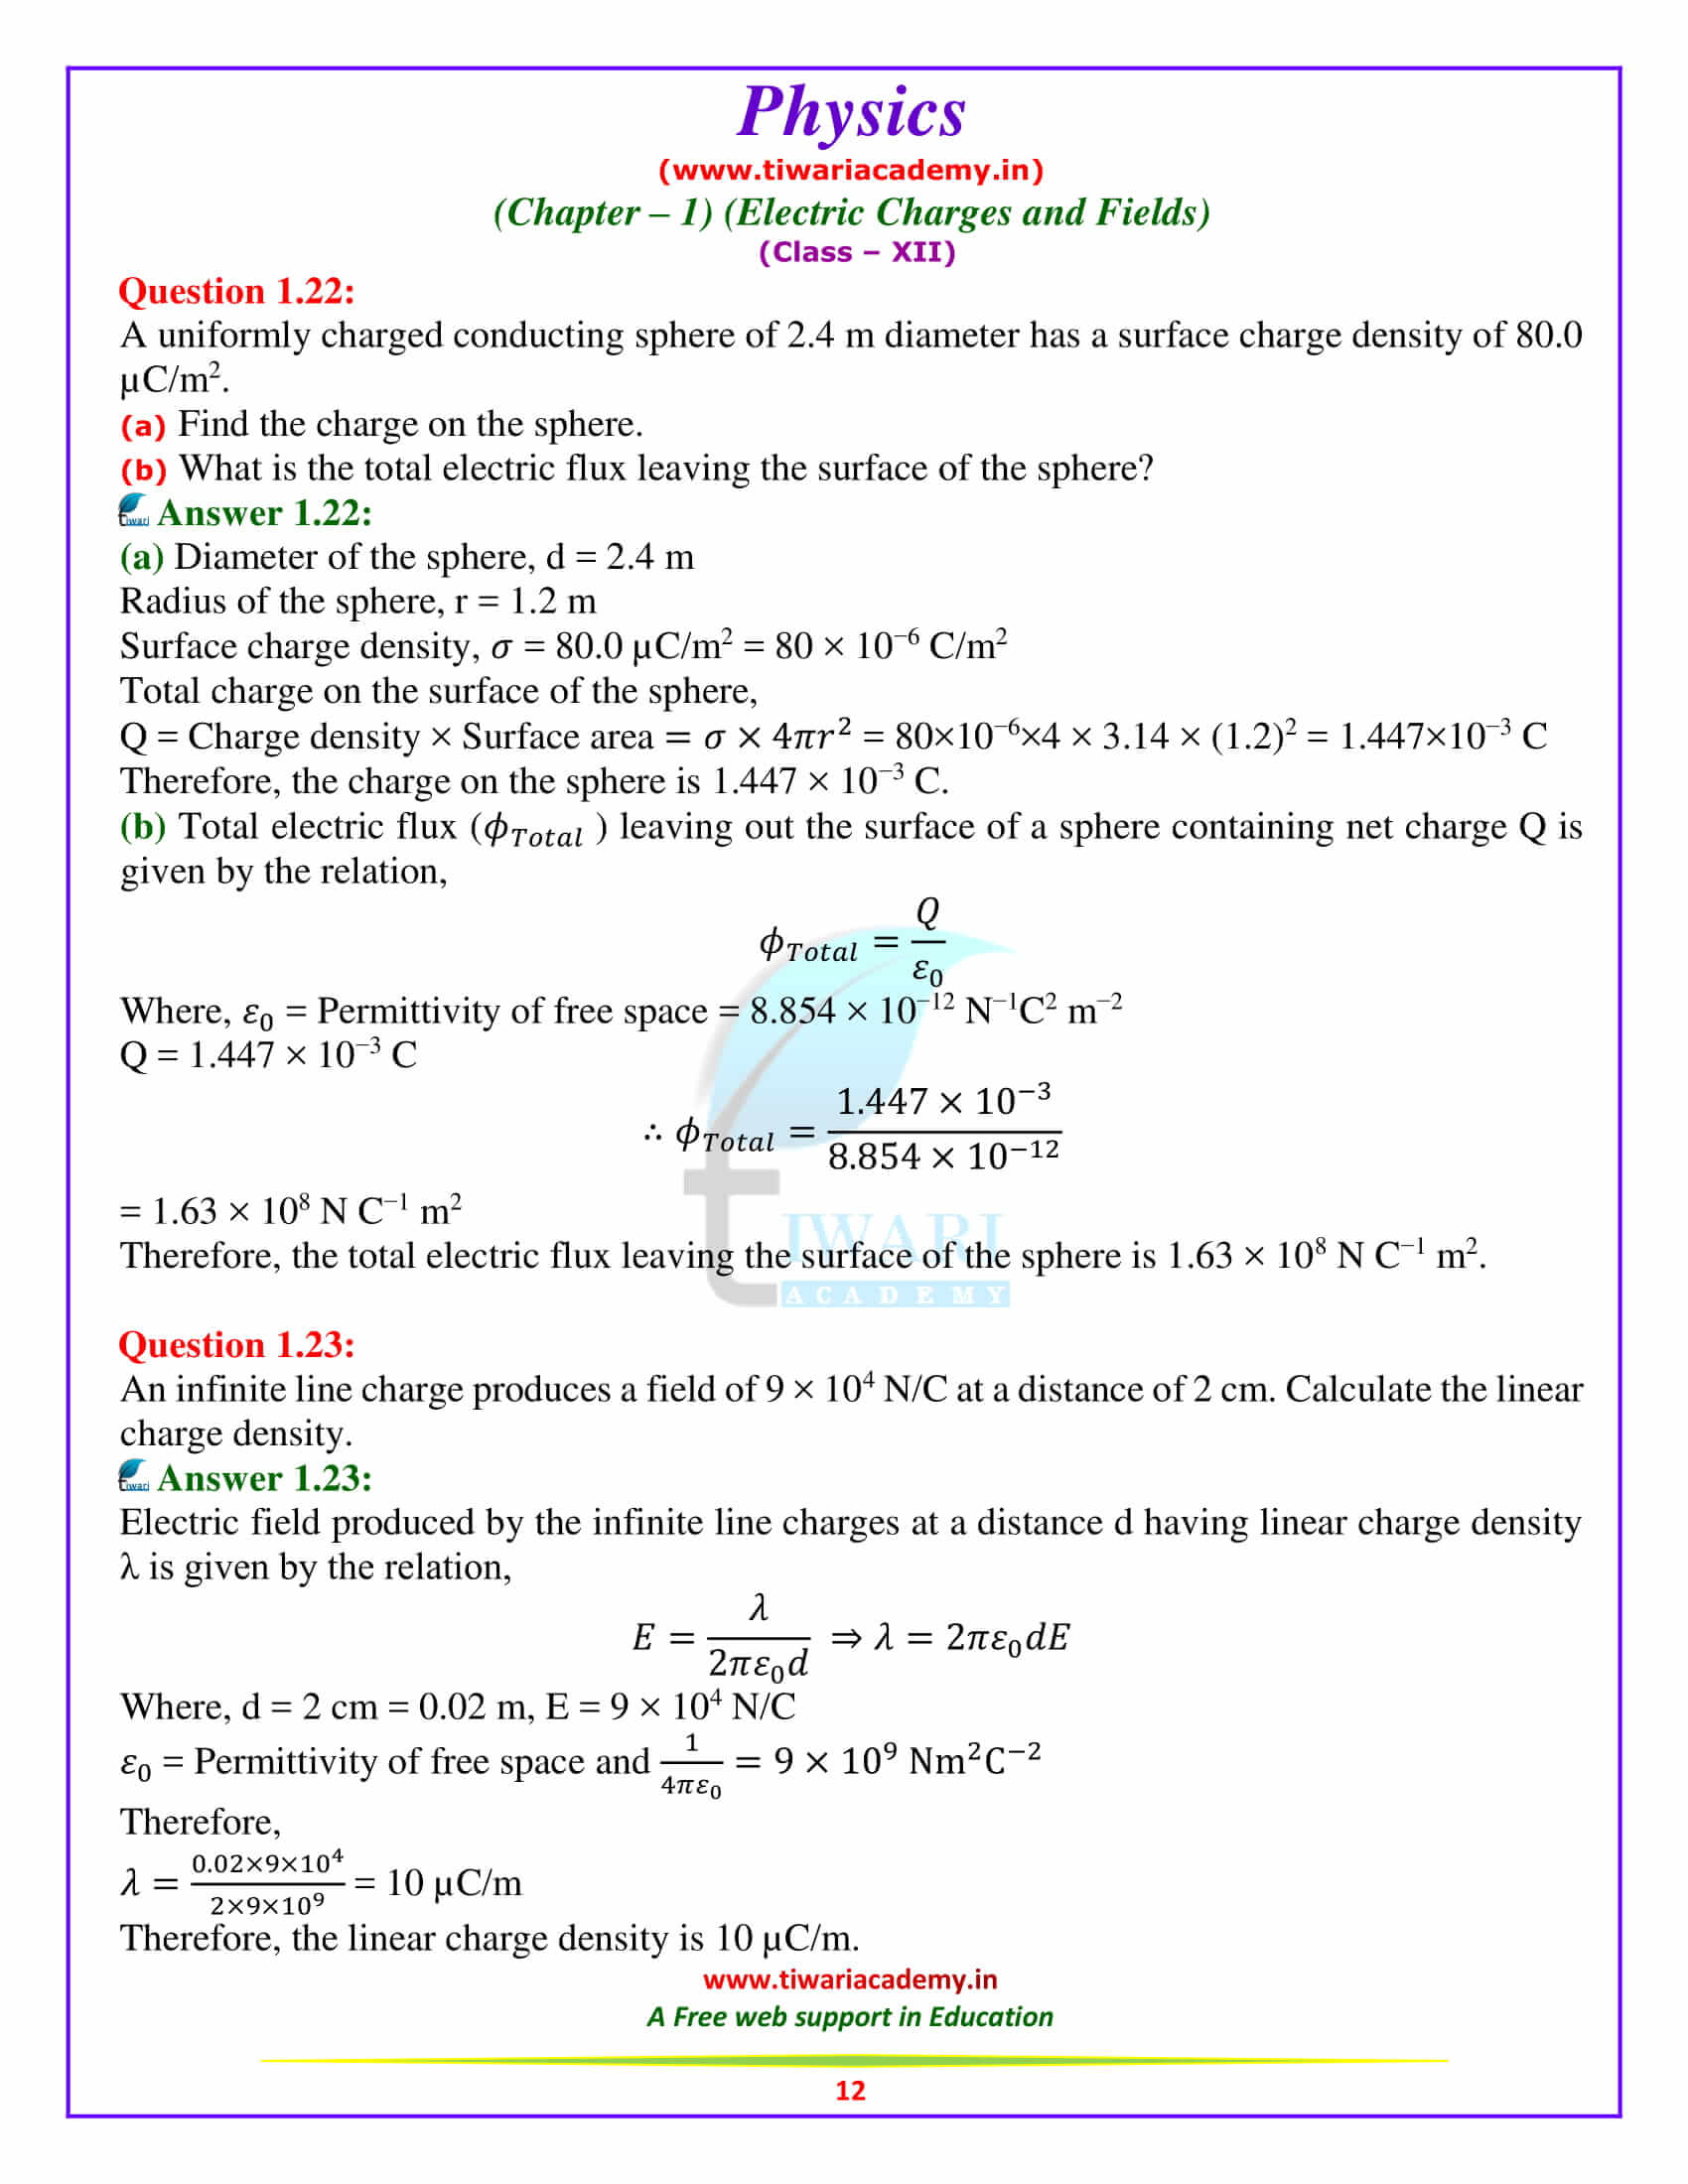 NCERT Solutions for Class 12 Physics Chapter 1 question 1 to 25